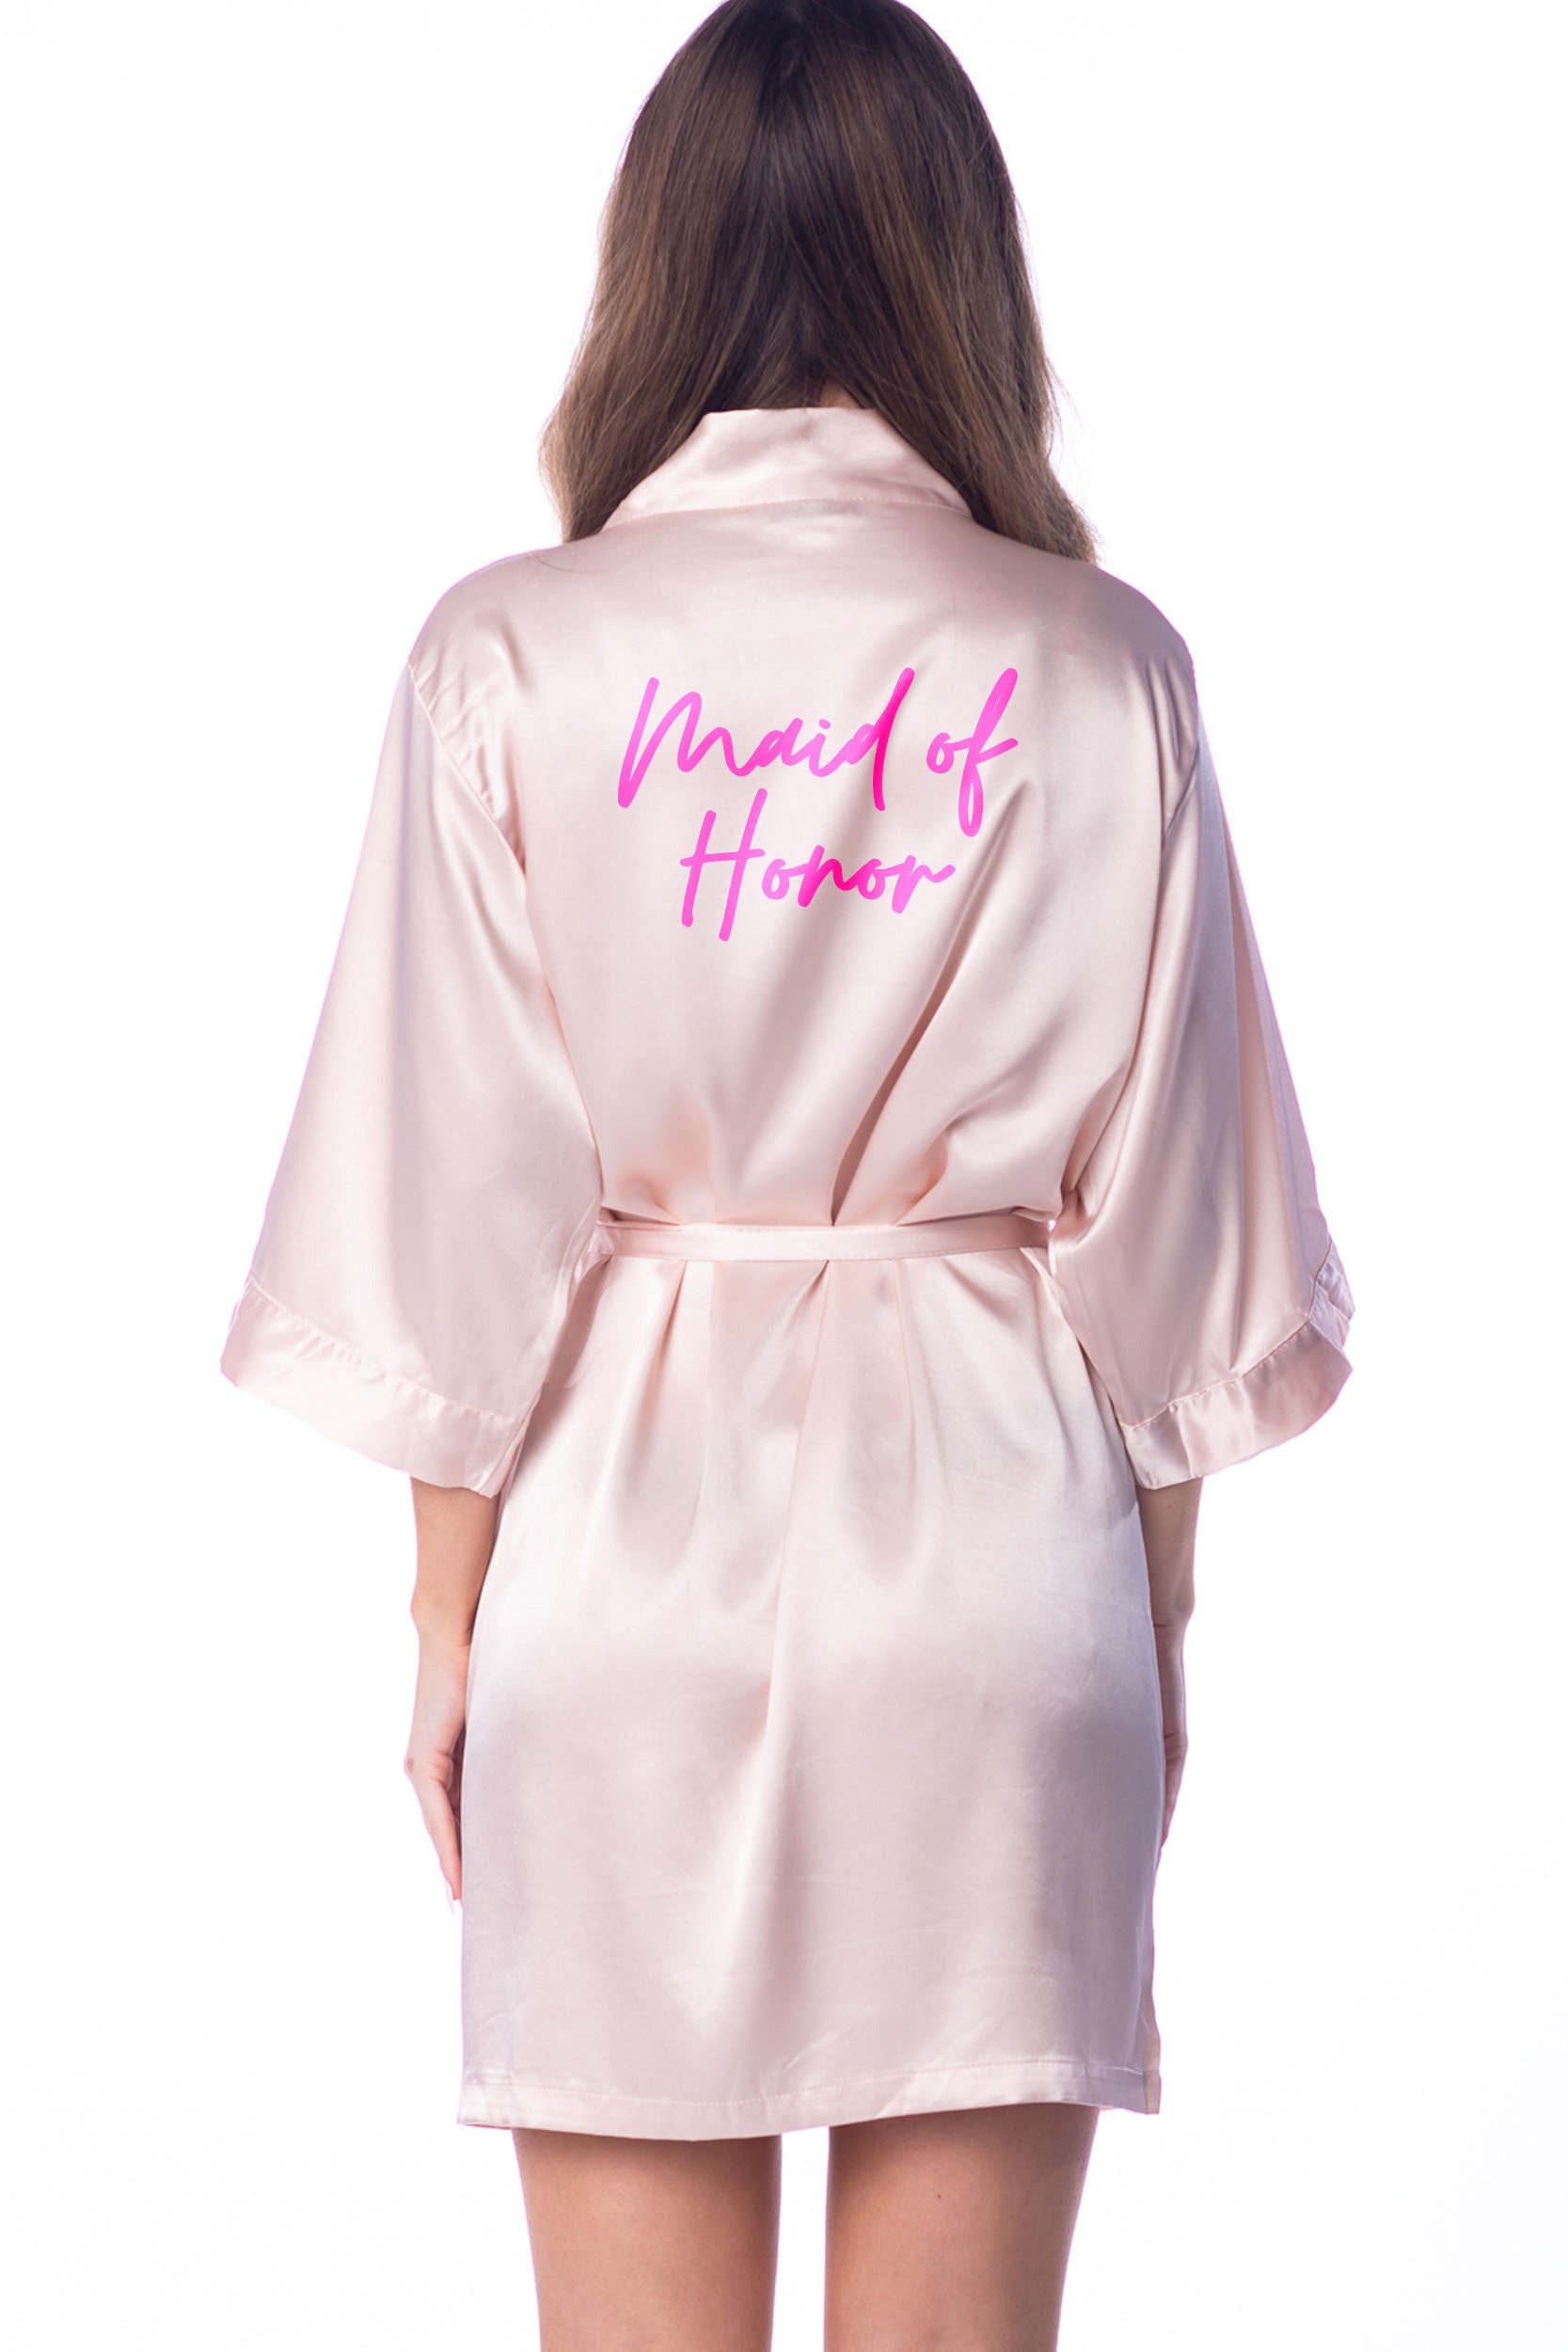 S/M "Maid of Honor" Blush Satin Lace Robe - Osulent Signature in Pink (Clearance Item)